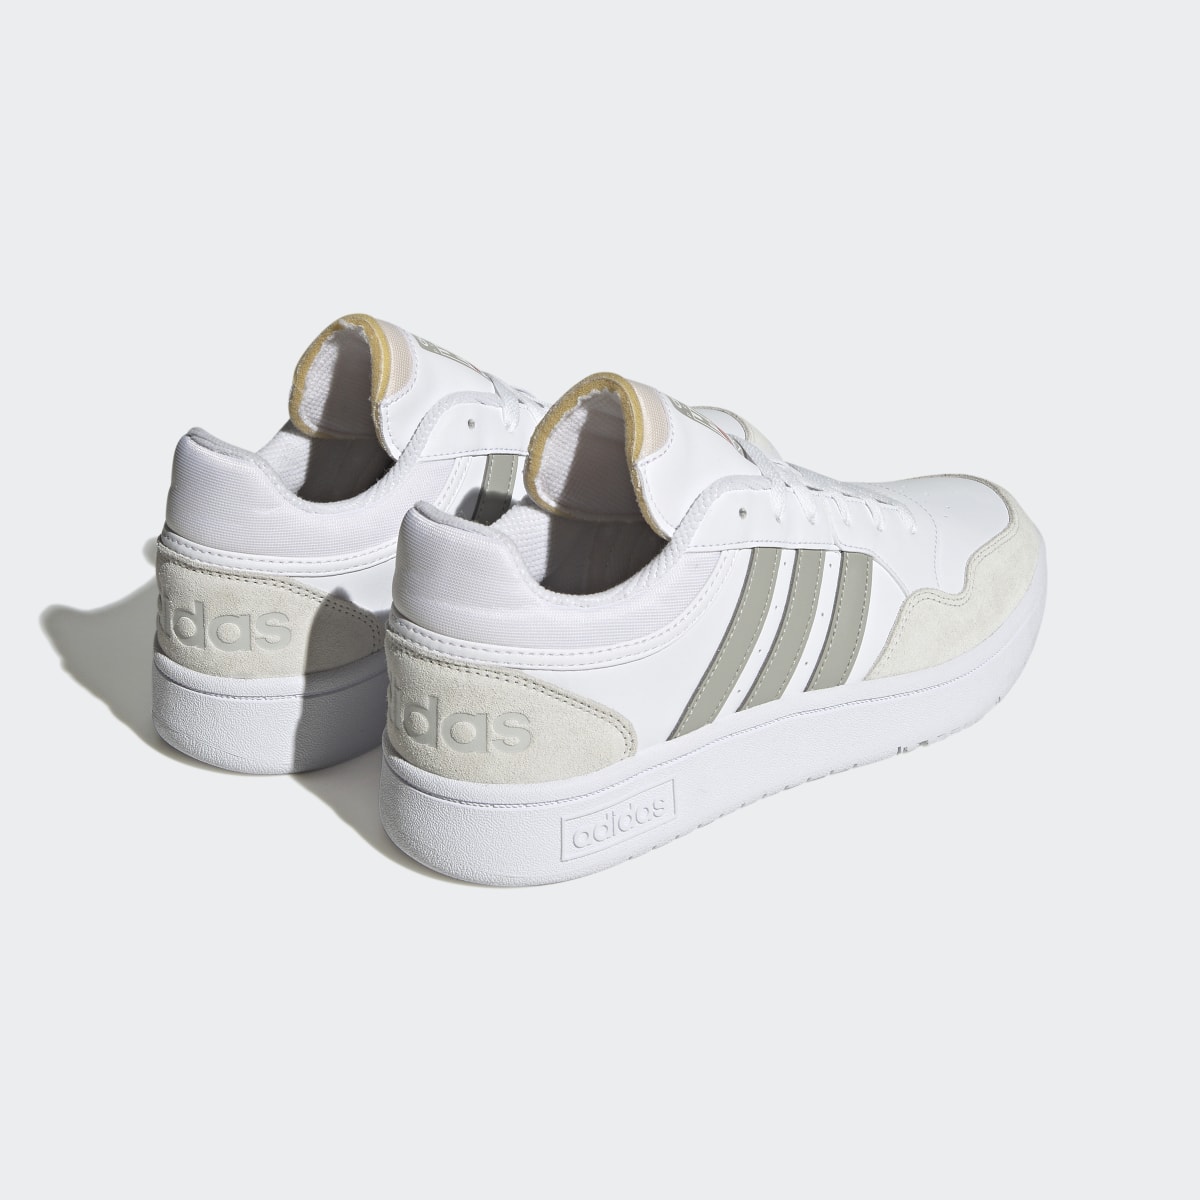 Adidas Hoops 3.0 Lifestyle Basketball Low Classic Vintage Shoes. 6